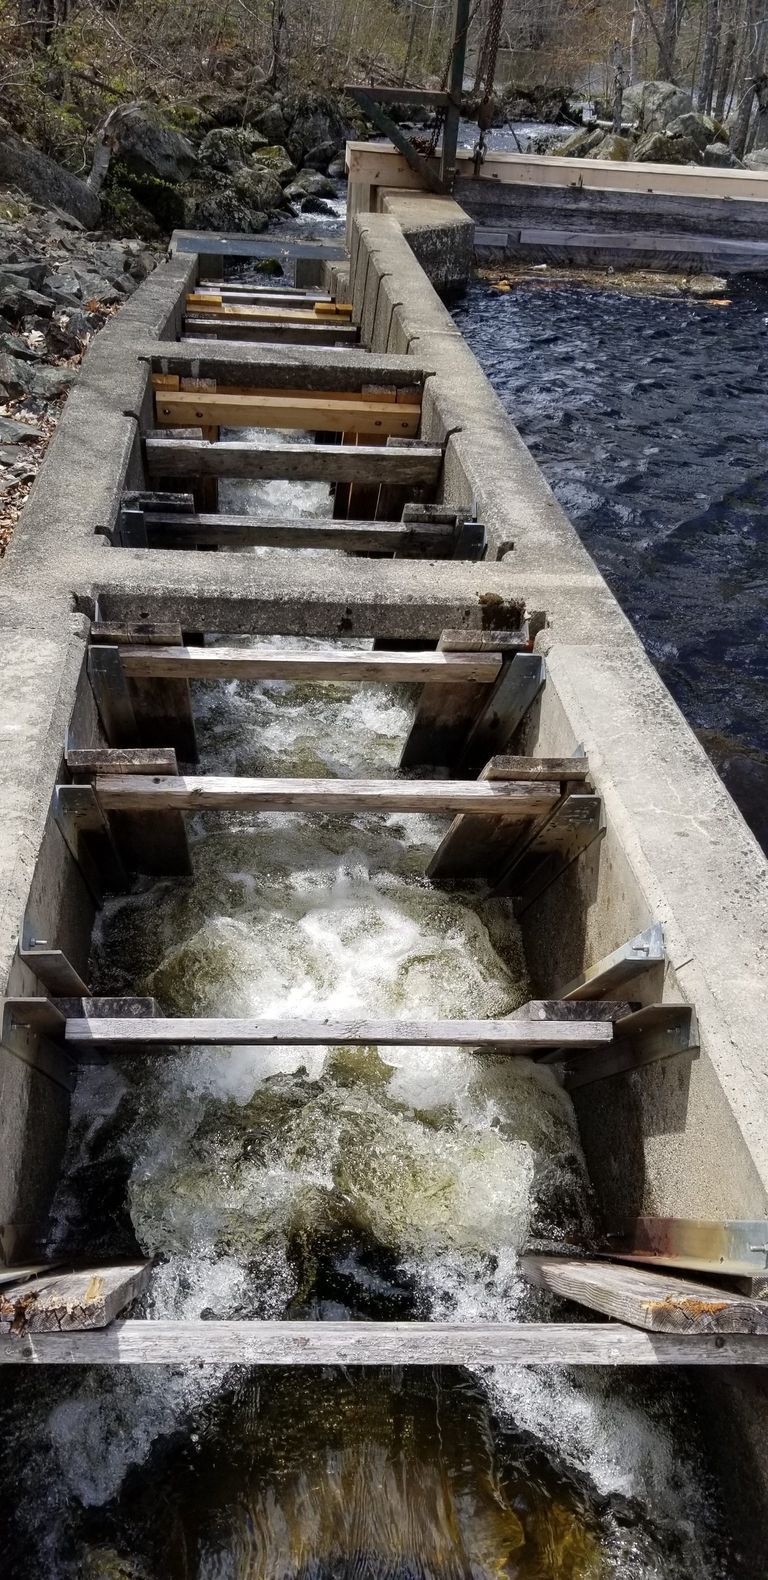          Fish Ladder at Meddybemps lake in alewife season; View of the Dennys River Fish ladder on Meddybemps Lake during Alewife season, early May 2023
   